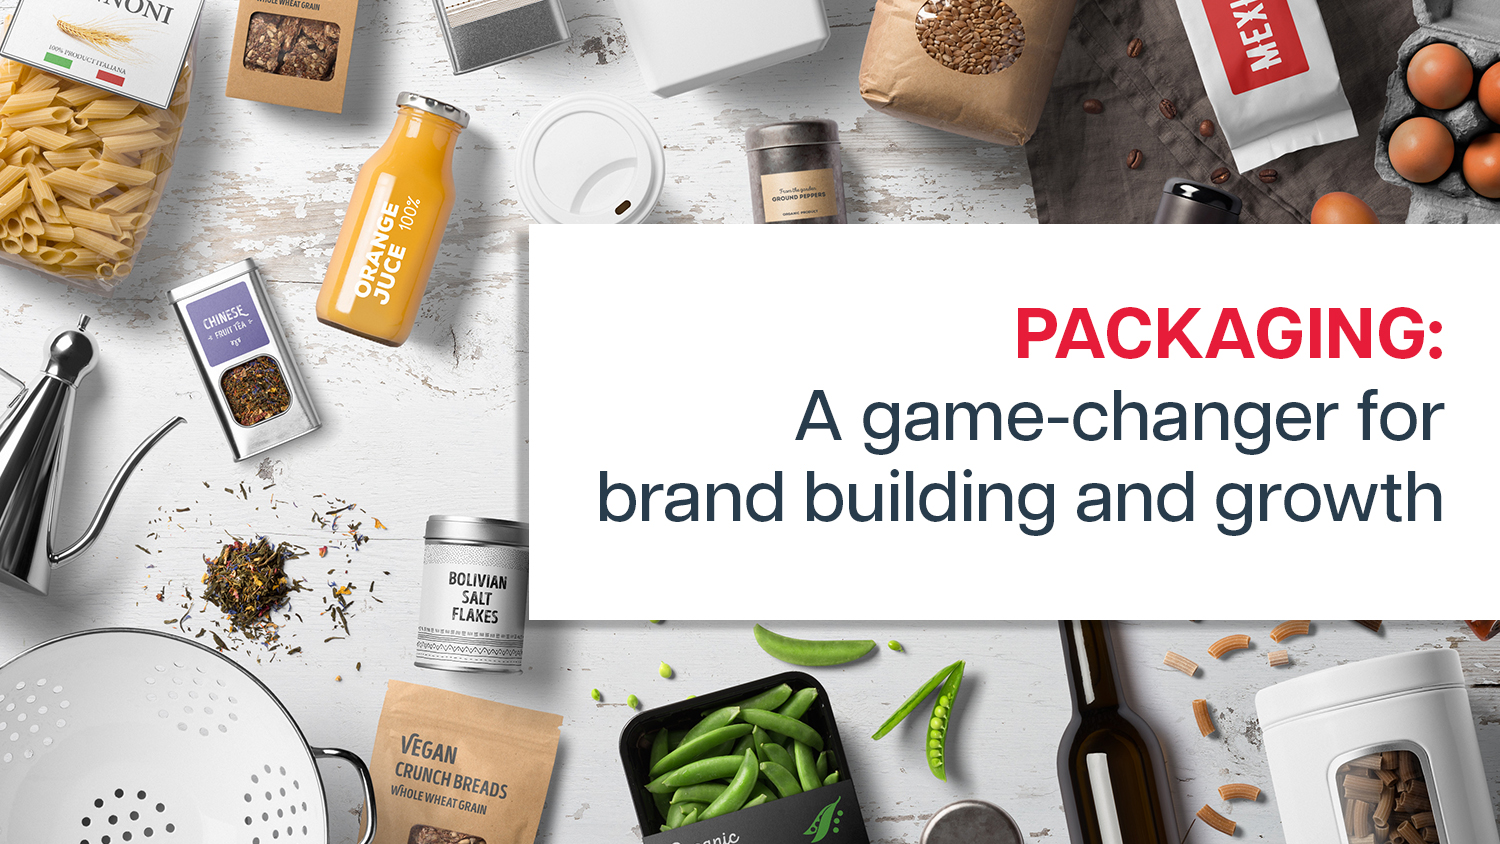 What is the significance of packaging in the growth of a brand